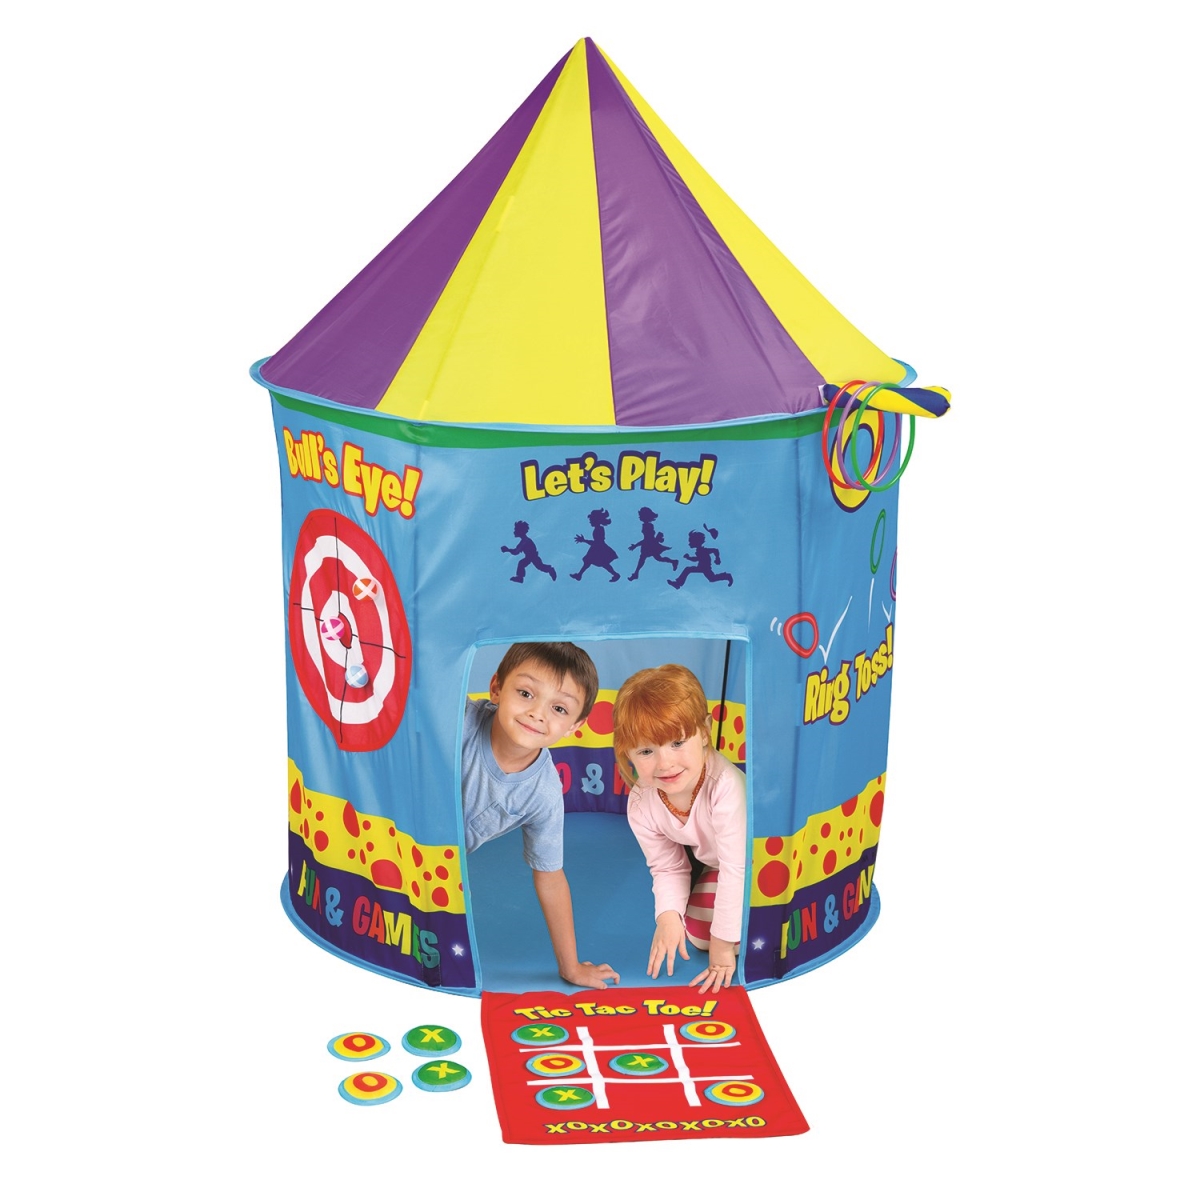 Picture of 212 Main 5326 3-in-1 Tent-Target Game - Tic Tac Toe & Ring Toss